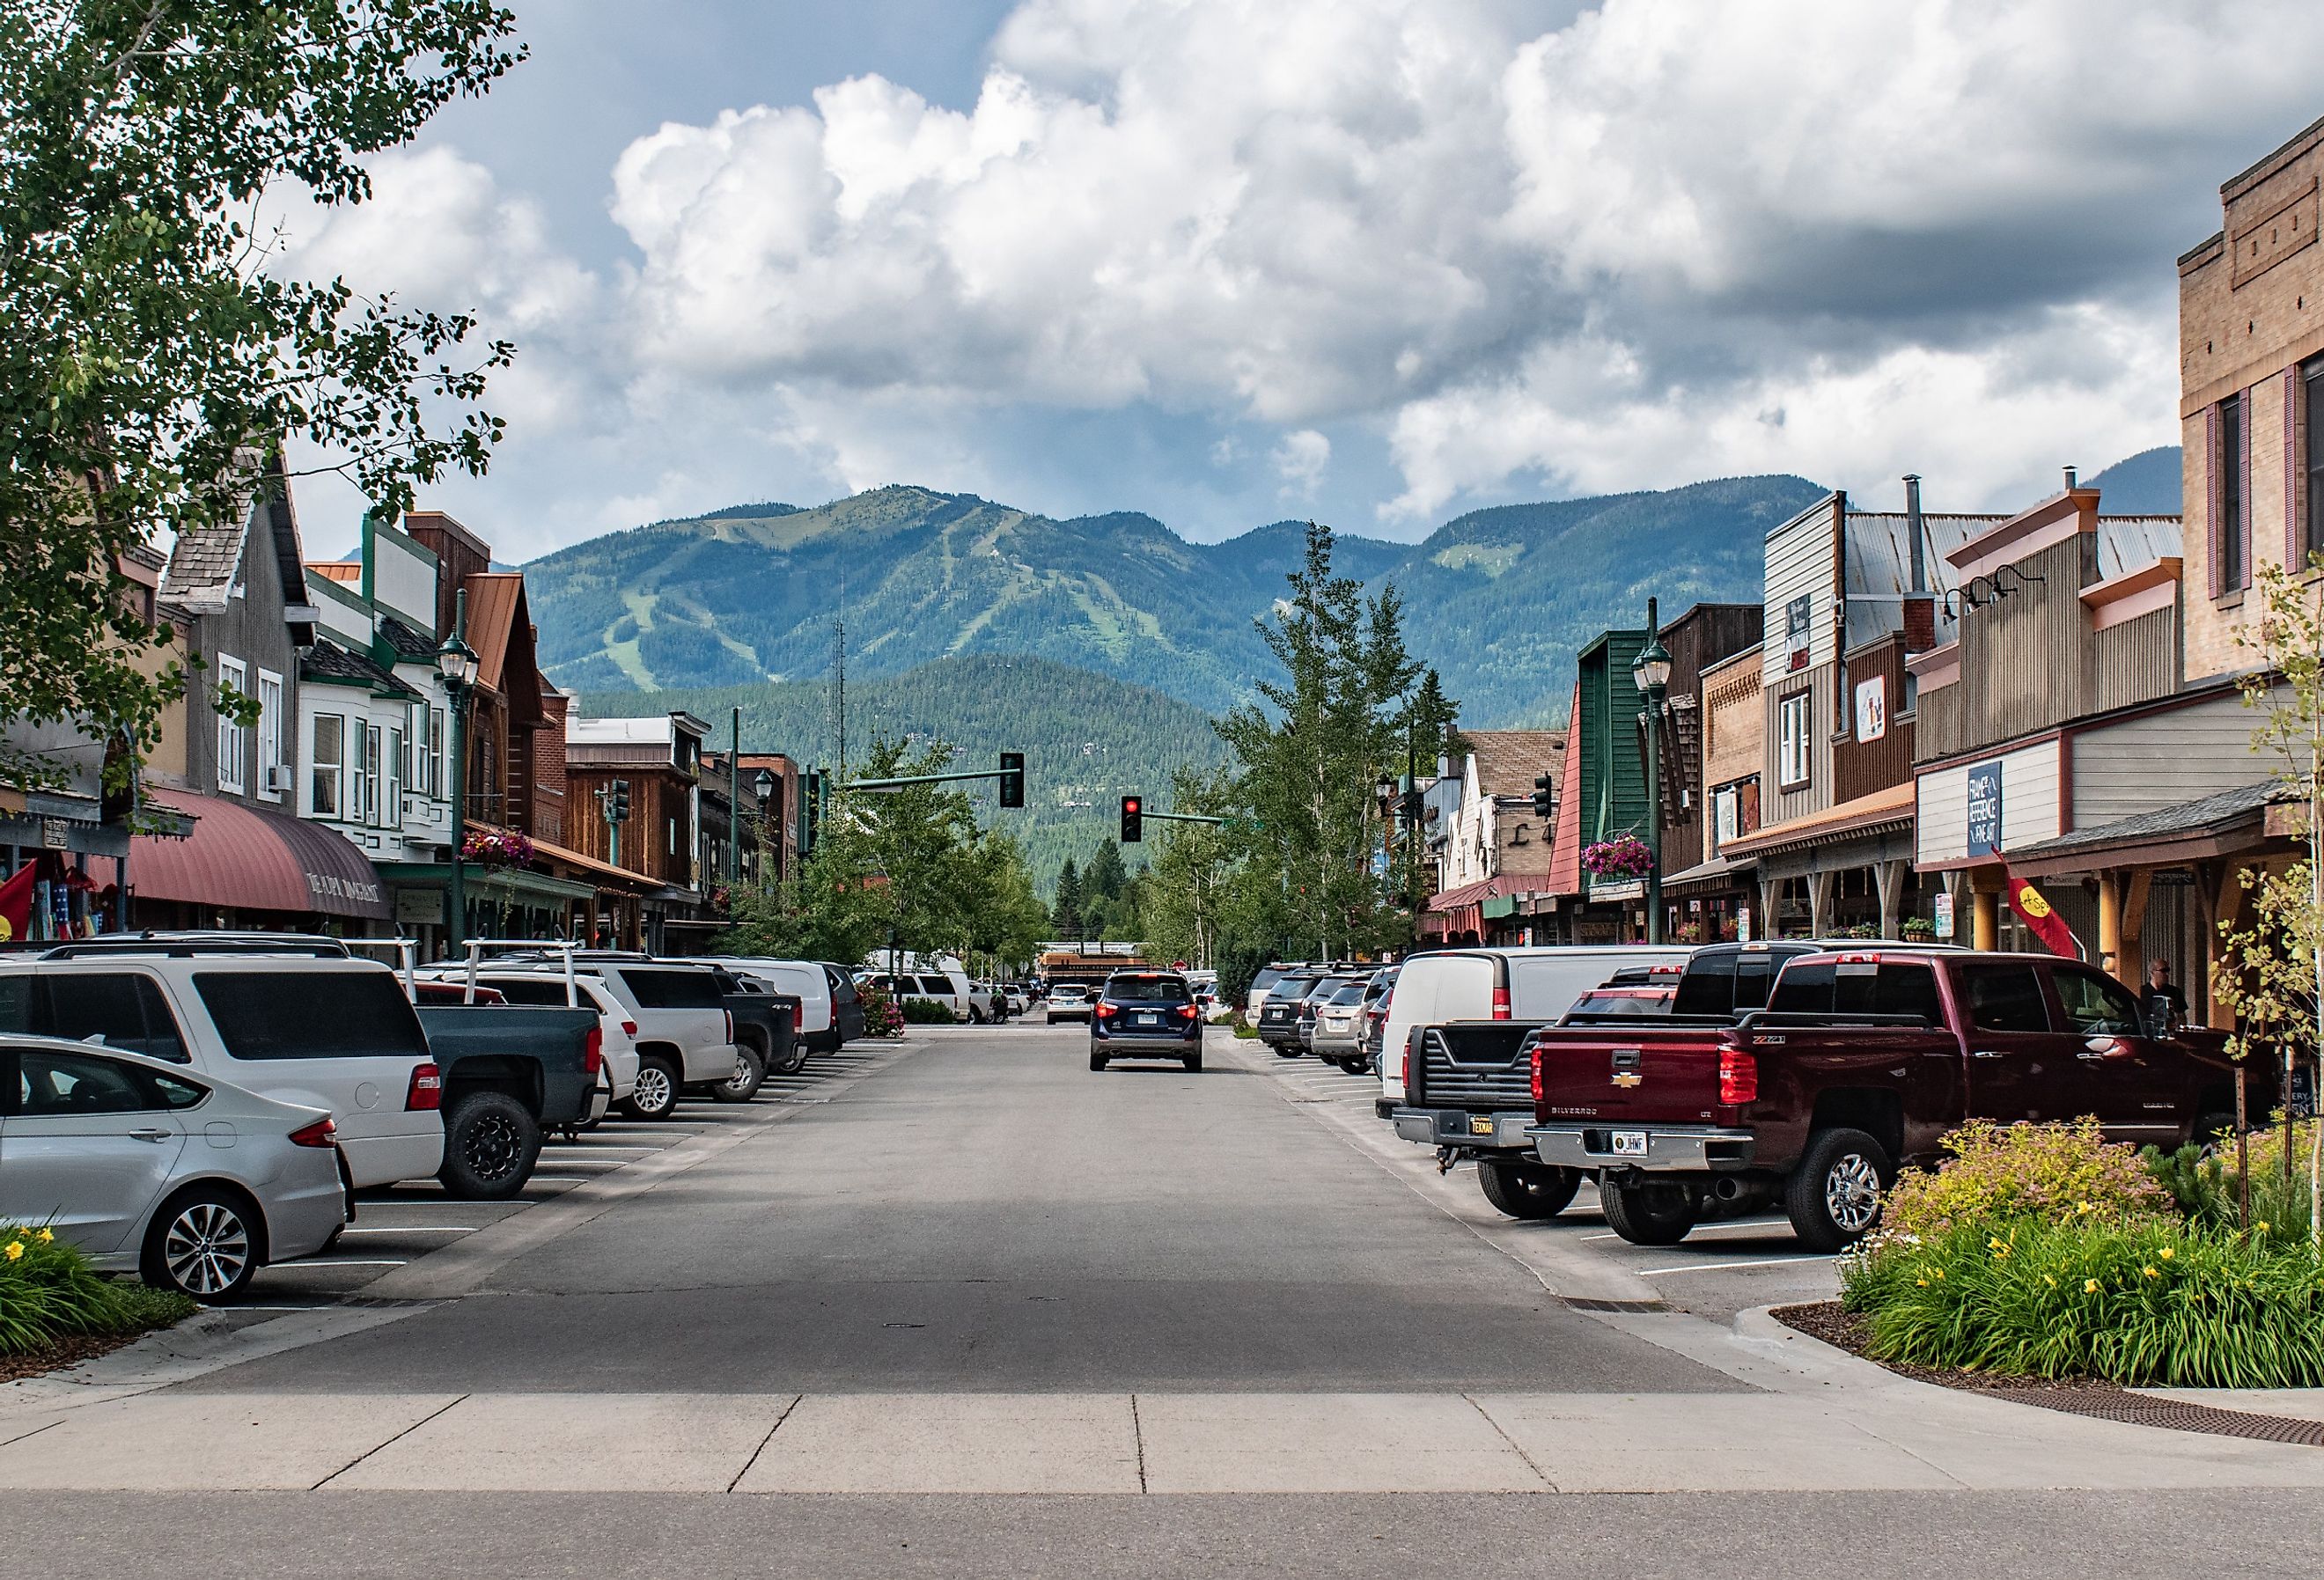 Mainstreet in Whitefish, Montana with the mountains in the background. Image credit Beeldtype via Shutterstock